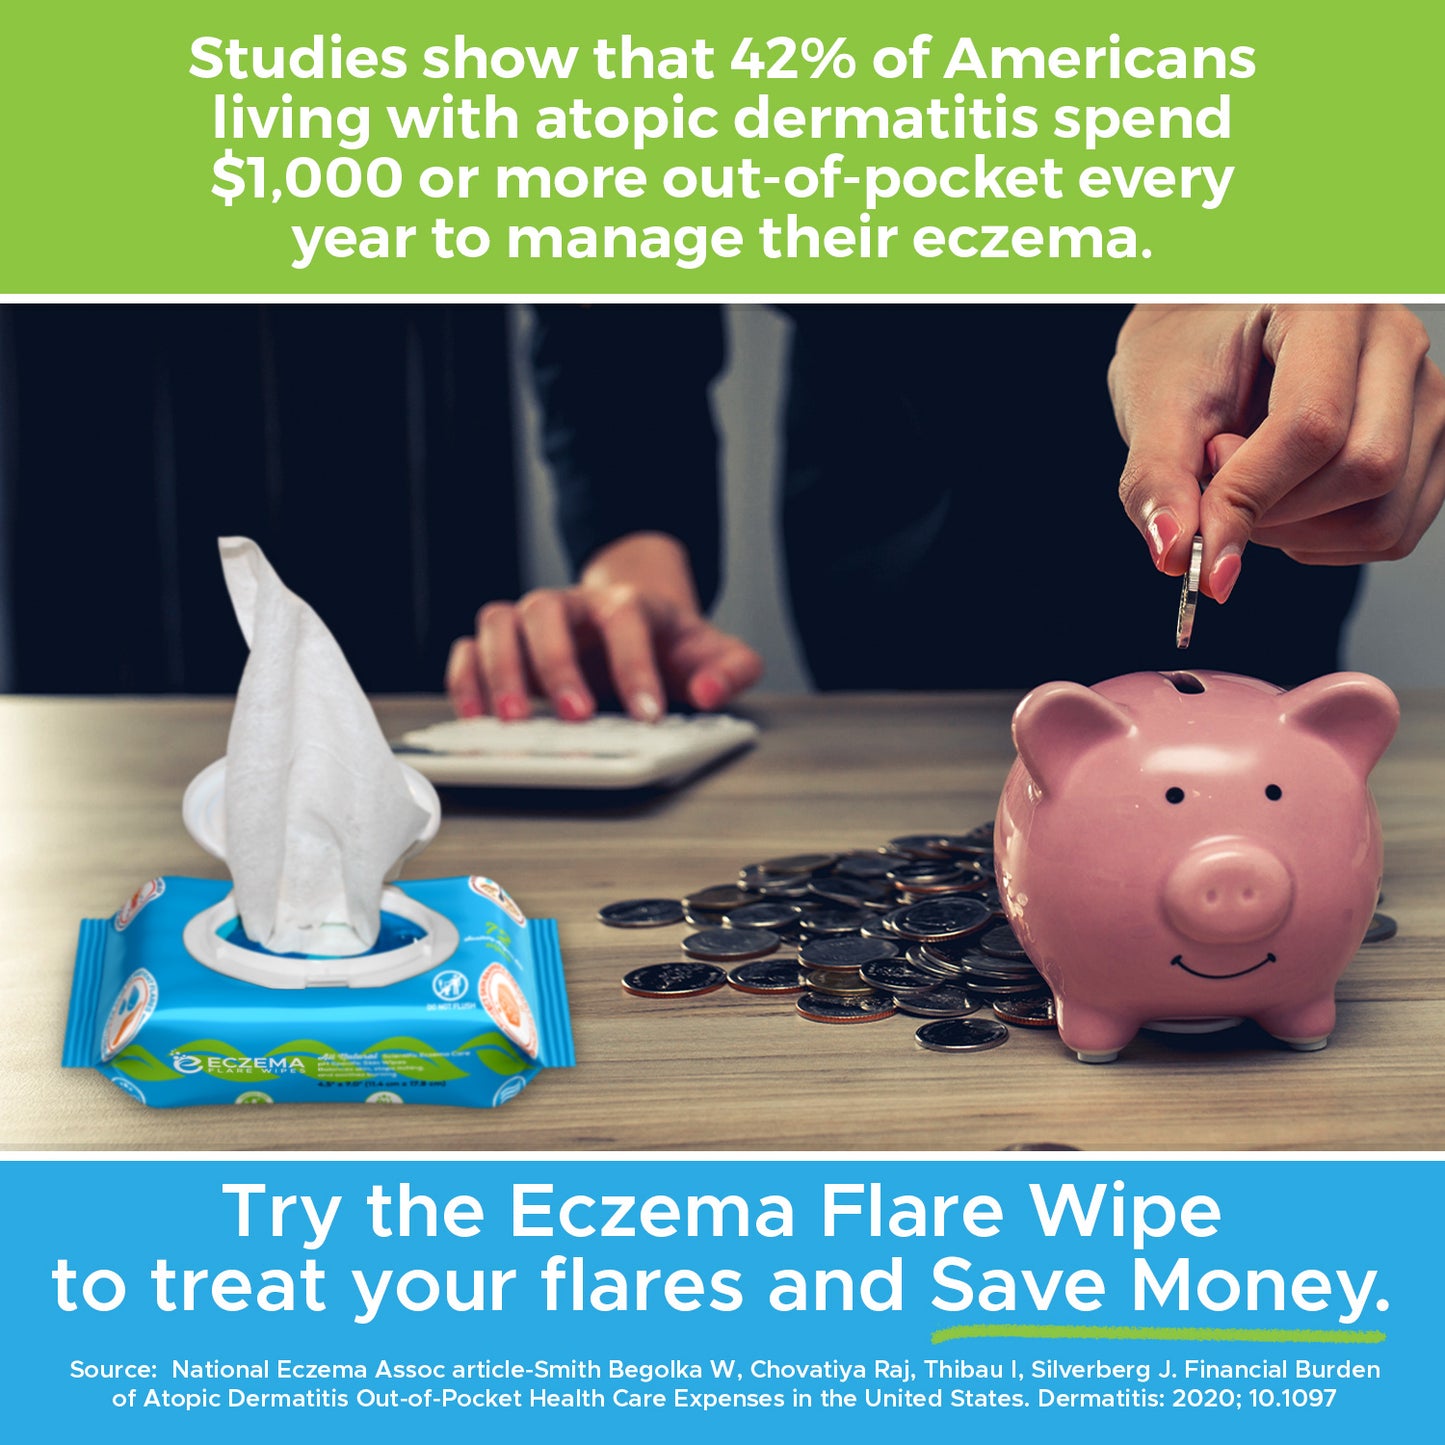 Studies show that 42% of Americans living with atopic dermatitis spend $1,00 or more out-of-pocket every year to manage their eczema. Try the Eczema Flare Wipe to treat your flares and Save Money. Source: National Eczema Assoc article-Smith Begolka W, Chovatiya Raj, Thibau I, Silverberg J. Financial Burden of Atopic Dermatitis Out-of-Pocket Health Care Expenses in the United States. Dermatitis: 2020; 10.1097